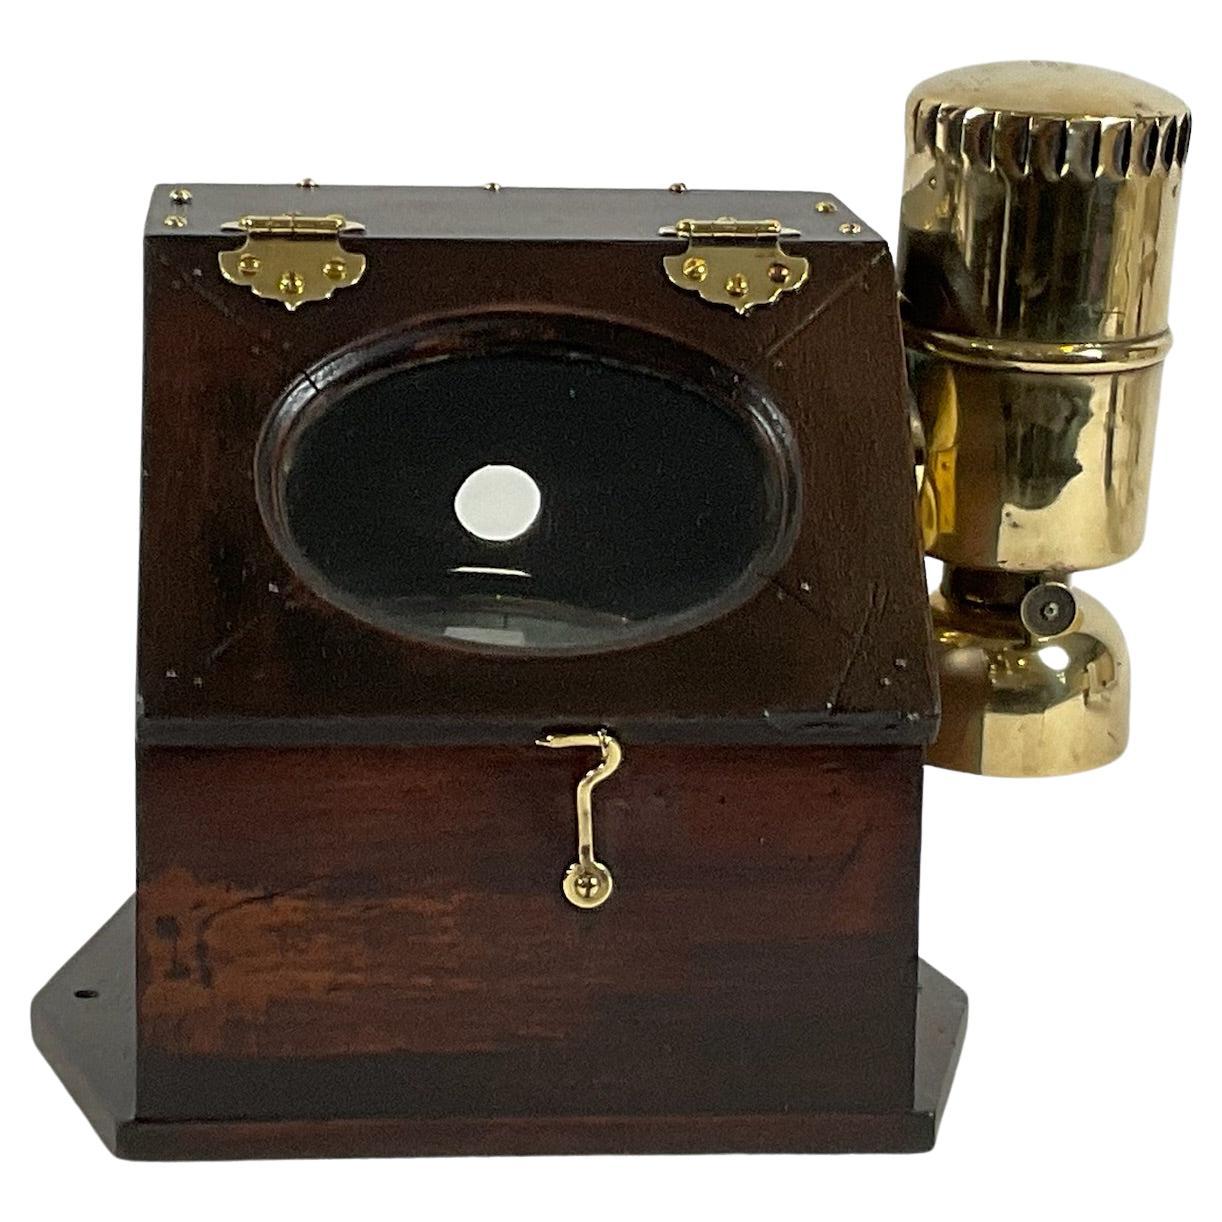 Boat Binnacle Compass from the 19th Century For Sale